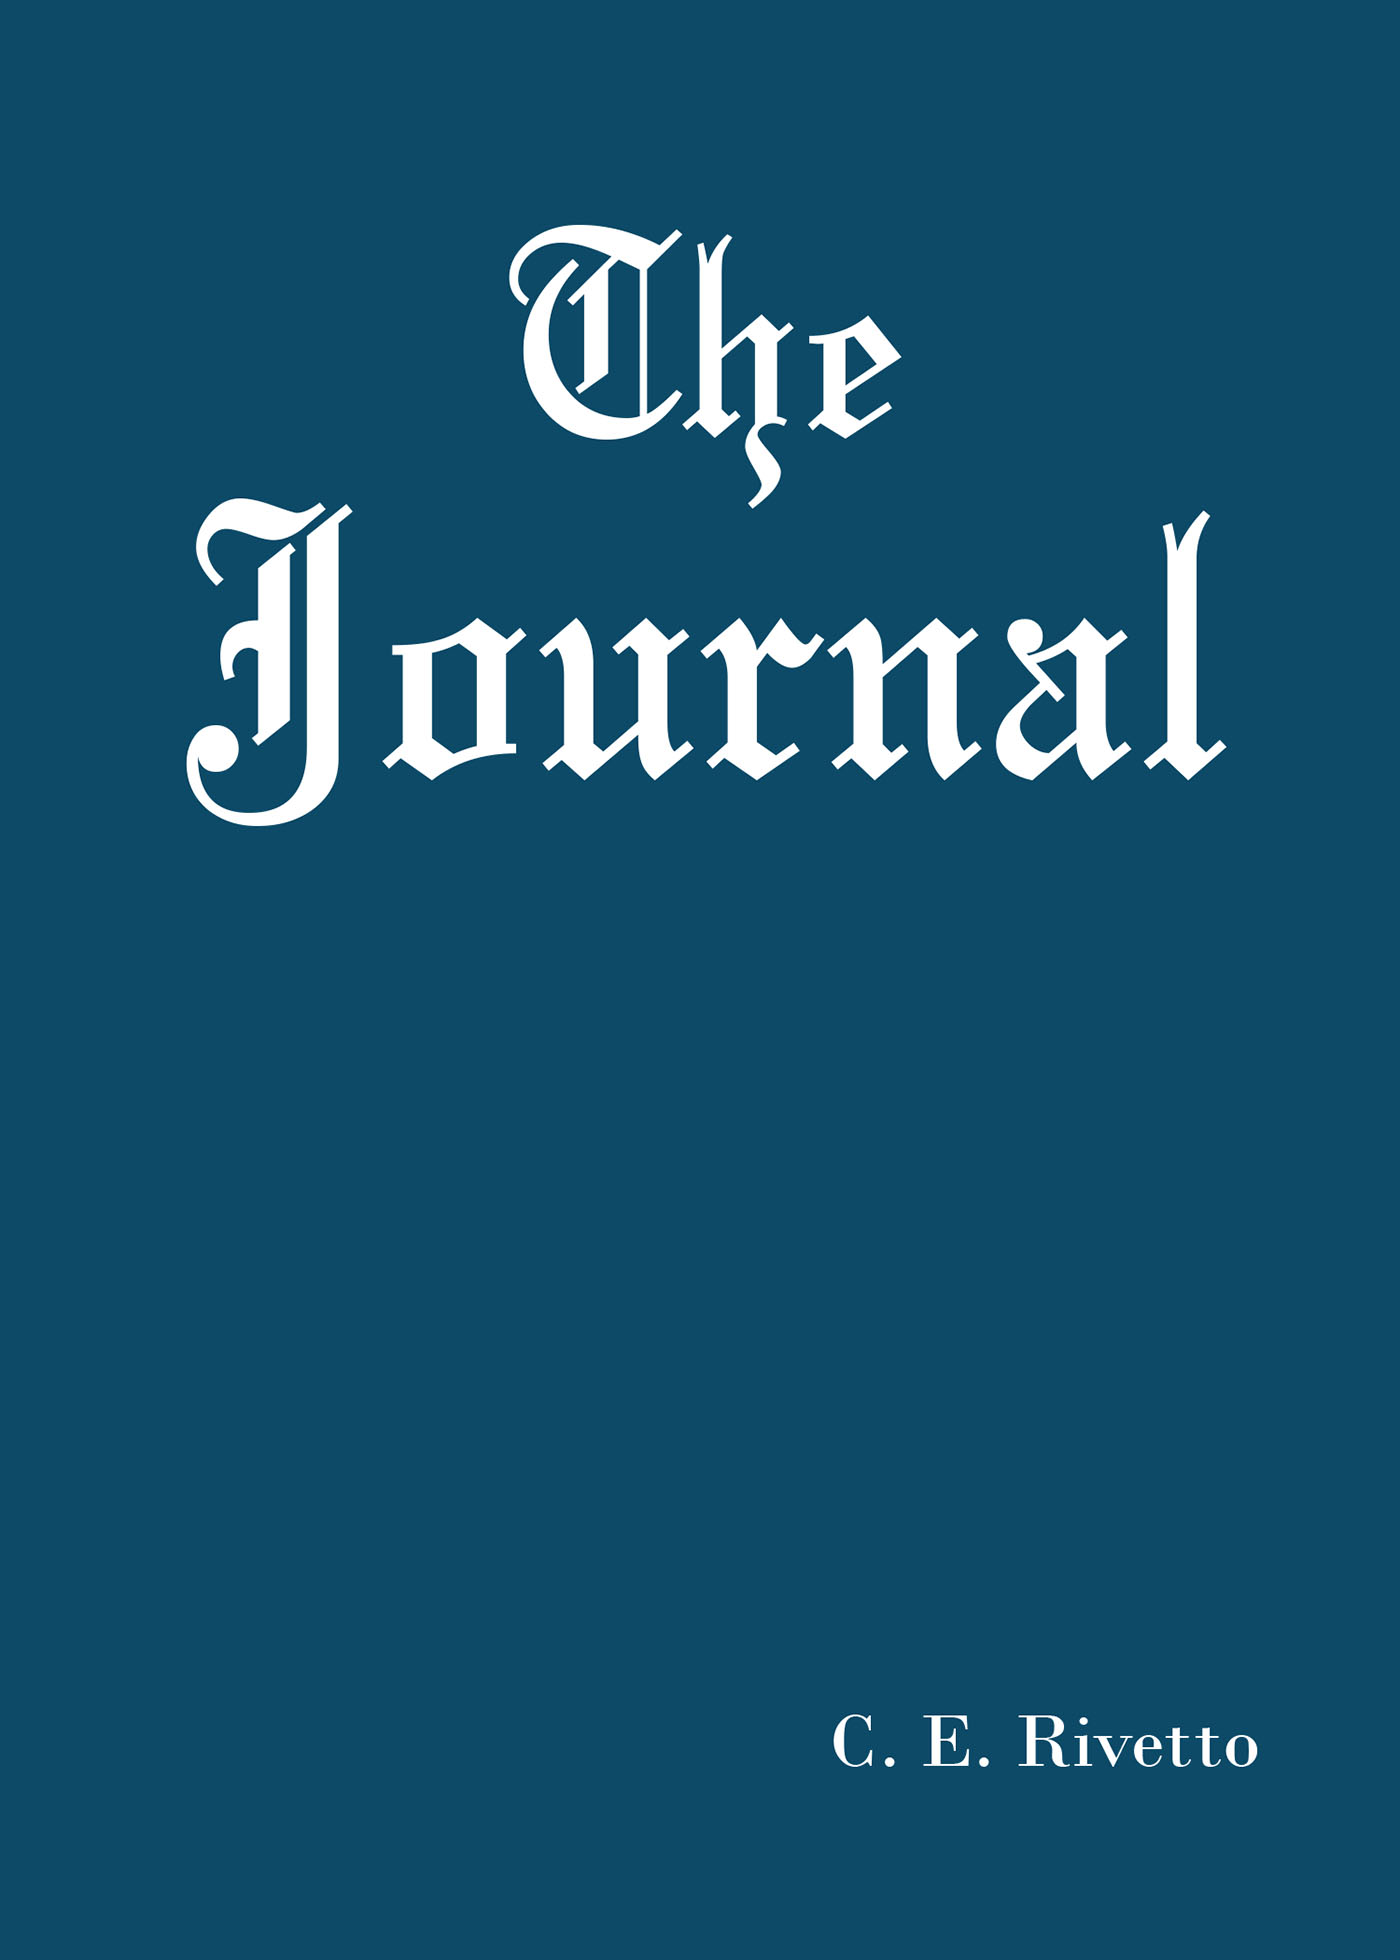 Author C. E. Rivetto’s New Young Adult Book, "The Journal," Takes Readers on an Incredible Journey That Occurs Over the Course of Two Eras in American History